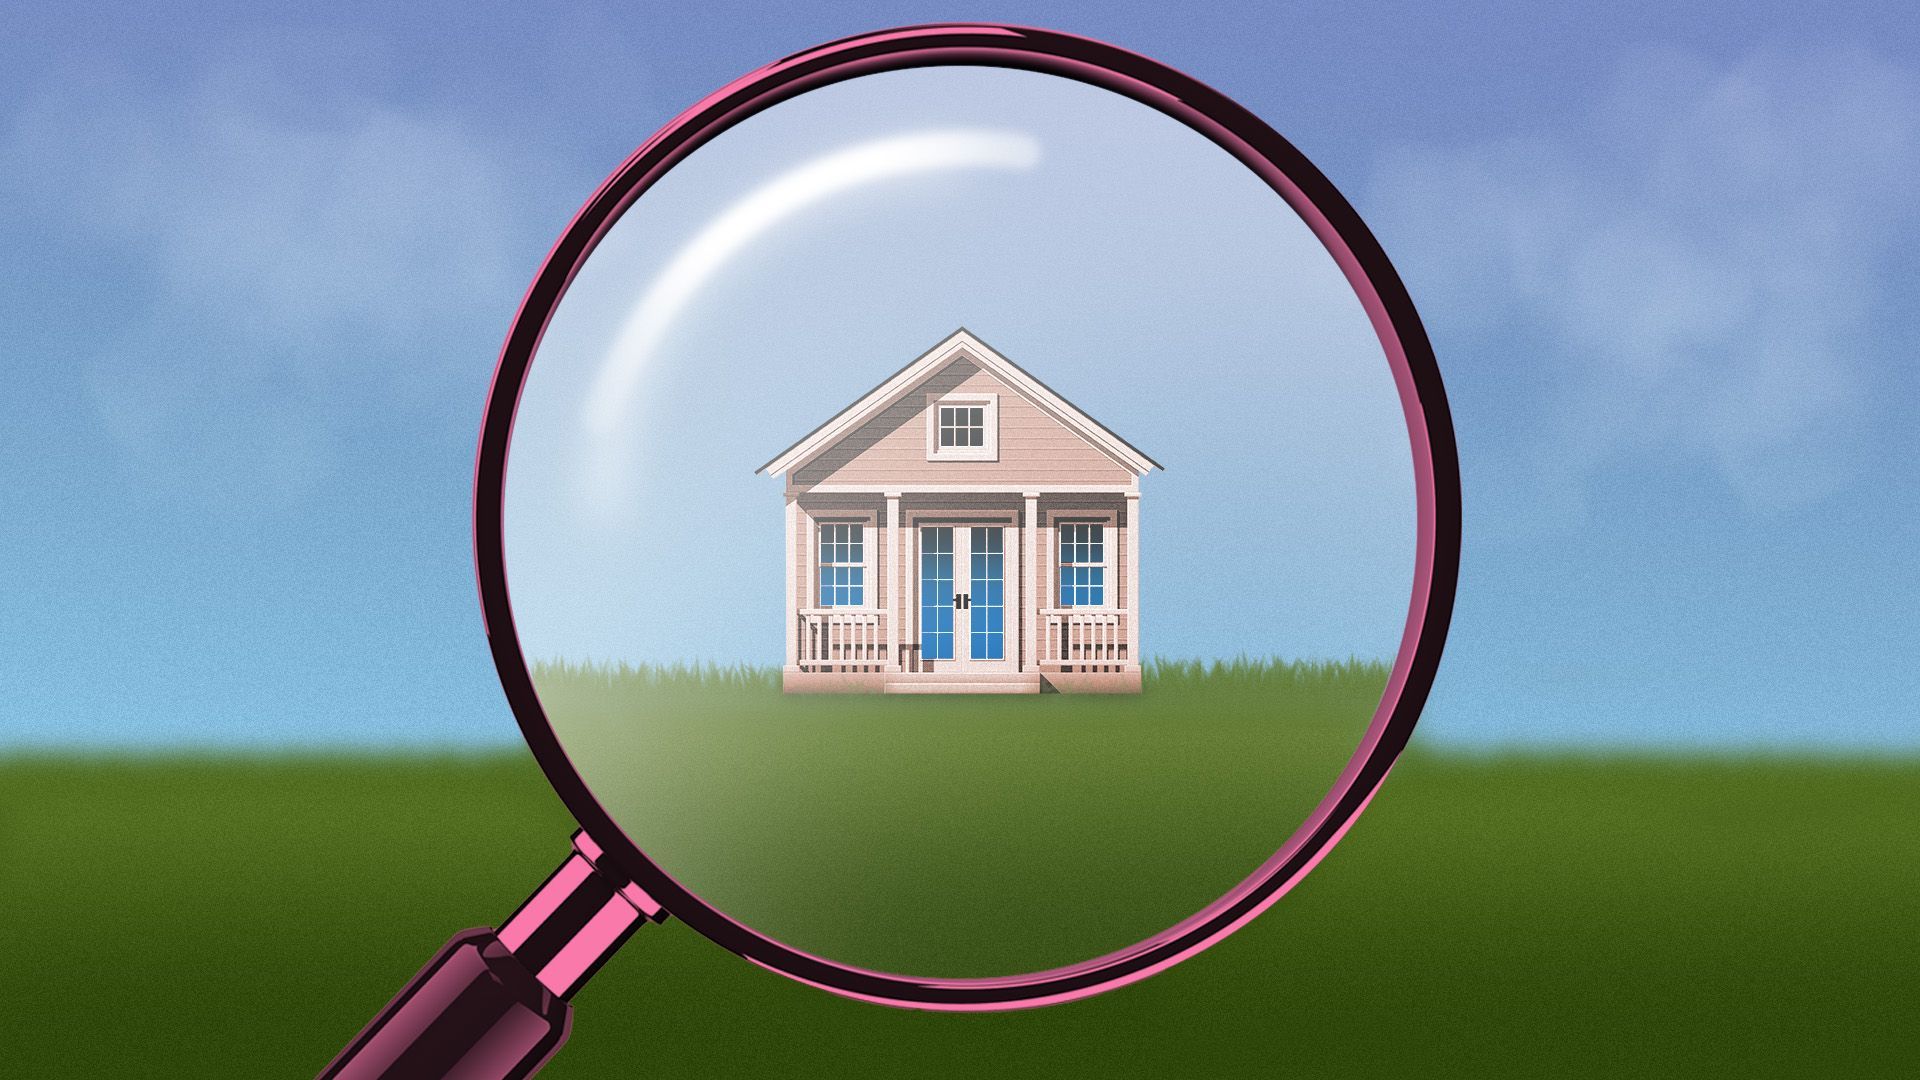 Illustration of a small house viewed through a magnifying glass